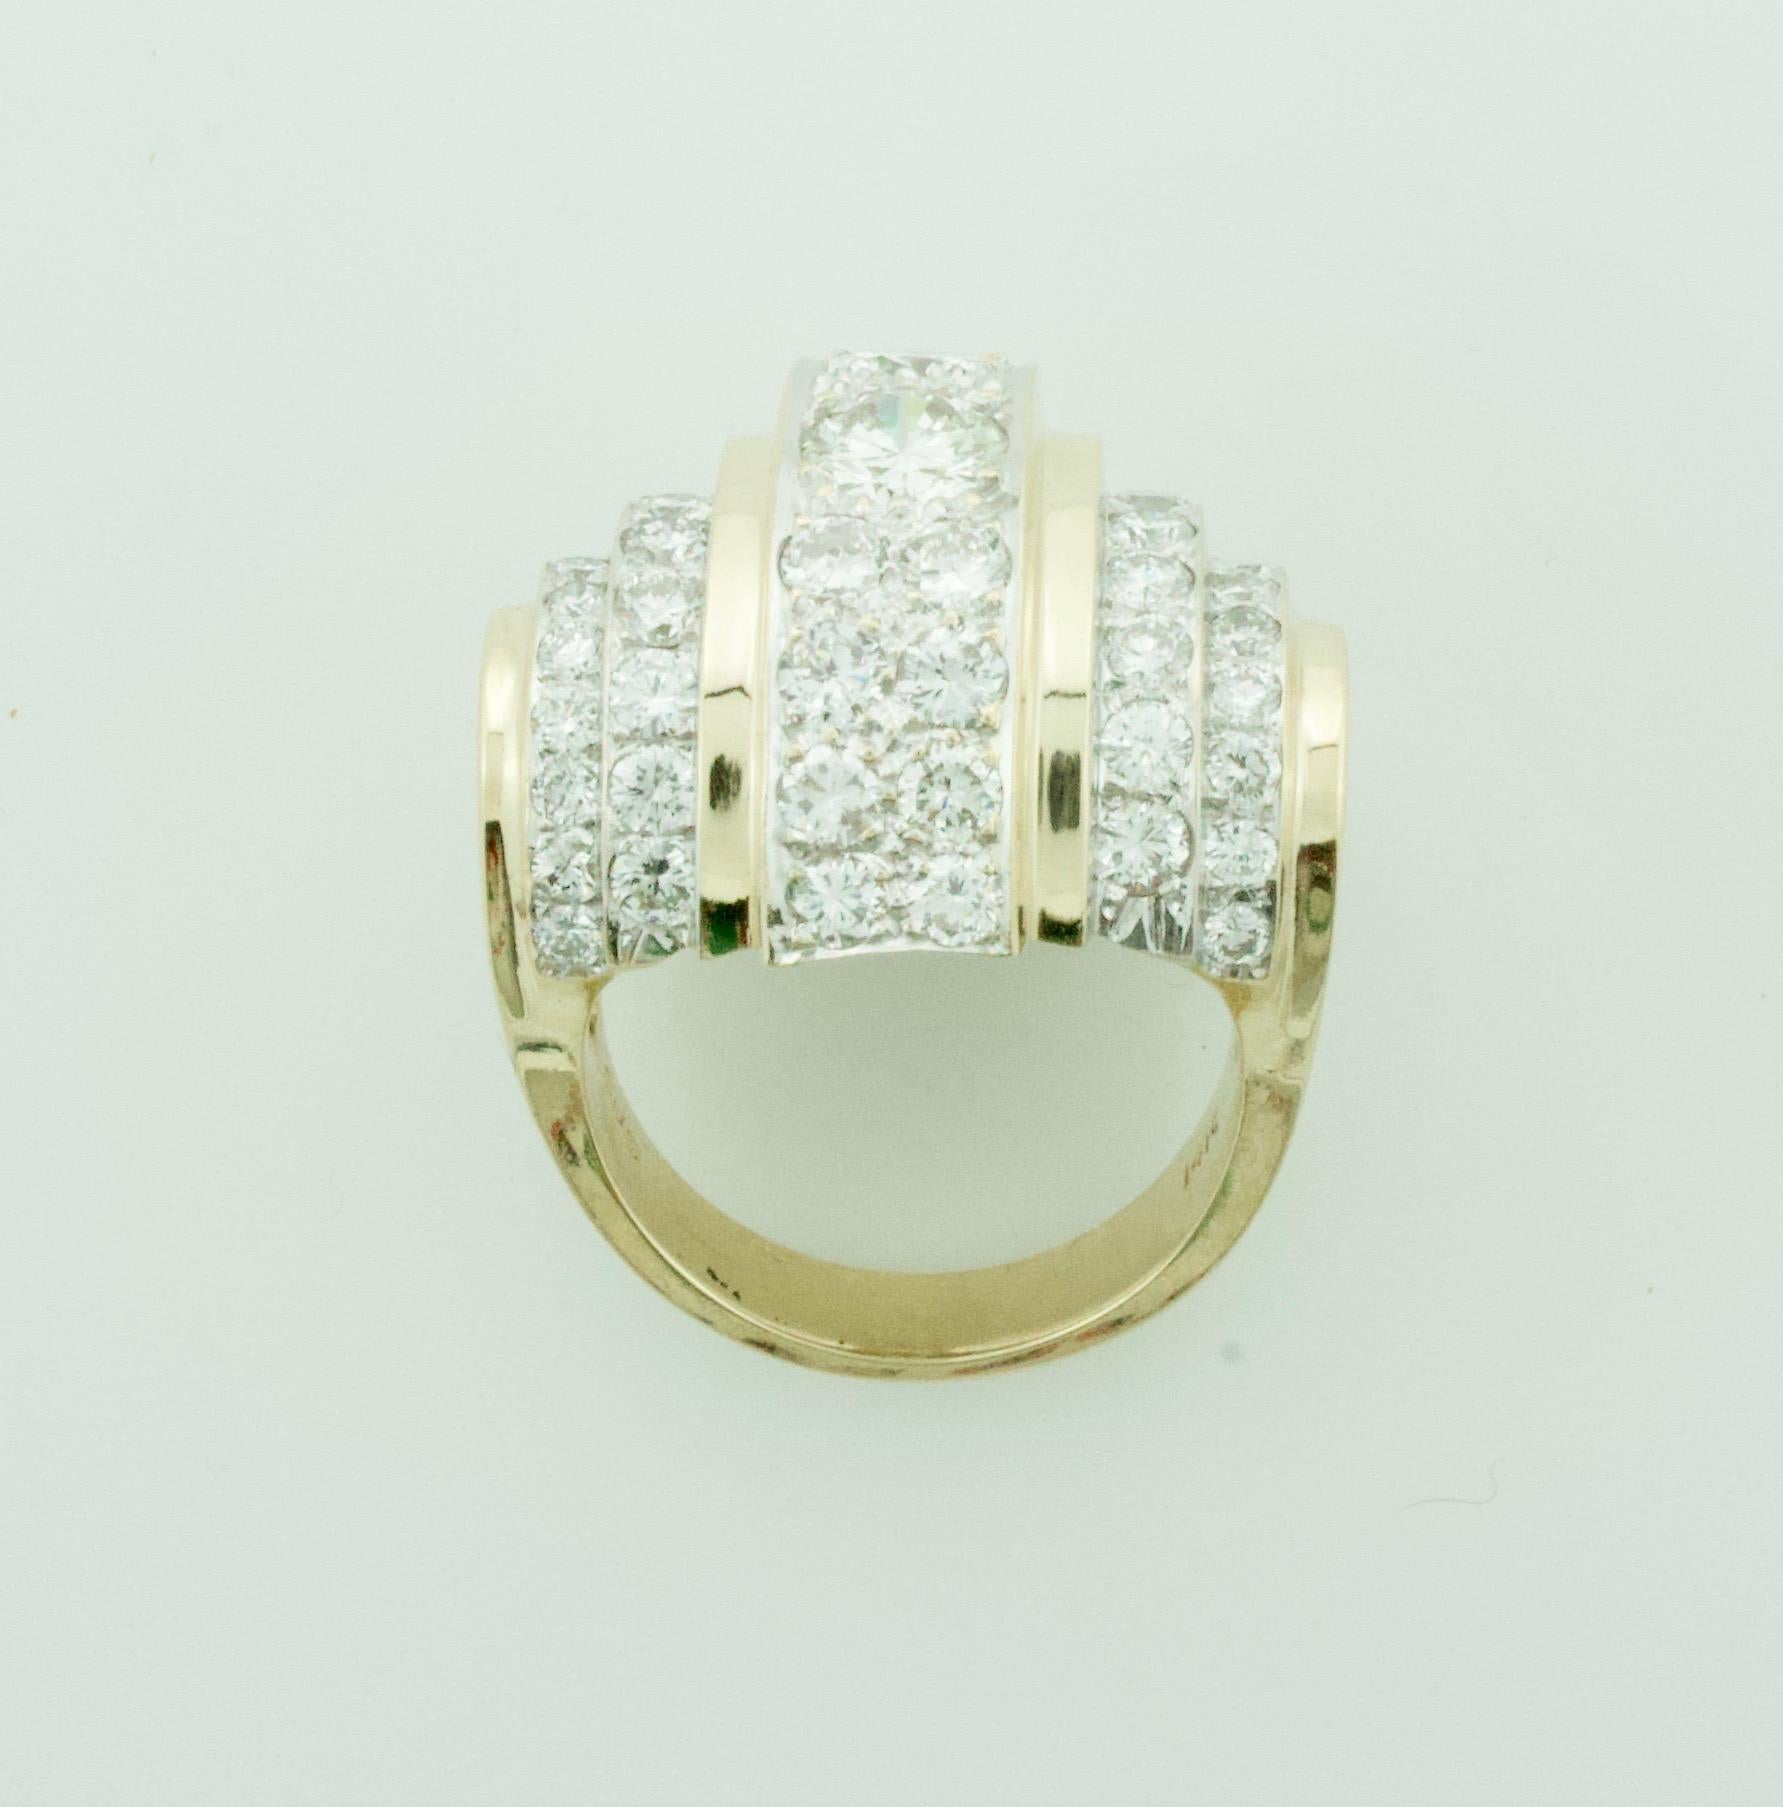 Big Diamond Diamond Ring in Yellow Gold Circa 1960's 3.40 cts.
2 Round Brilliant Cut Diamonds Weighing 1.00 Carats Approximately [Color GHI Clarity VVS-SI1]
56 Round Brilliant Cut Diamonds Weighing 2.40 Carats Approximately  [Color GHI Clarity